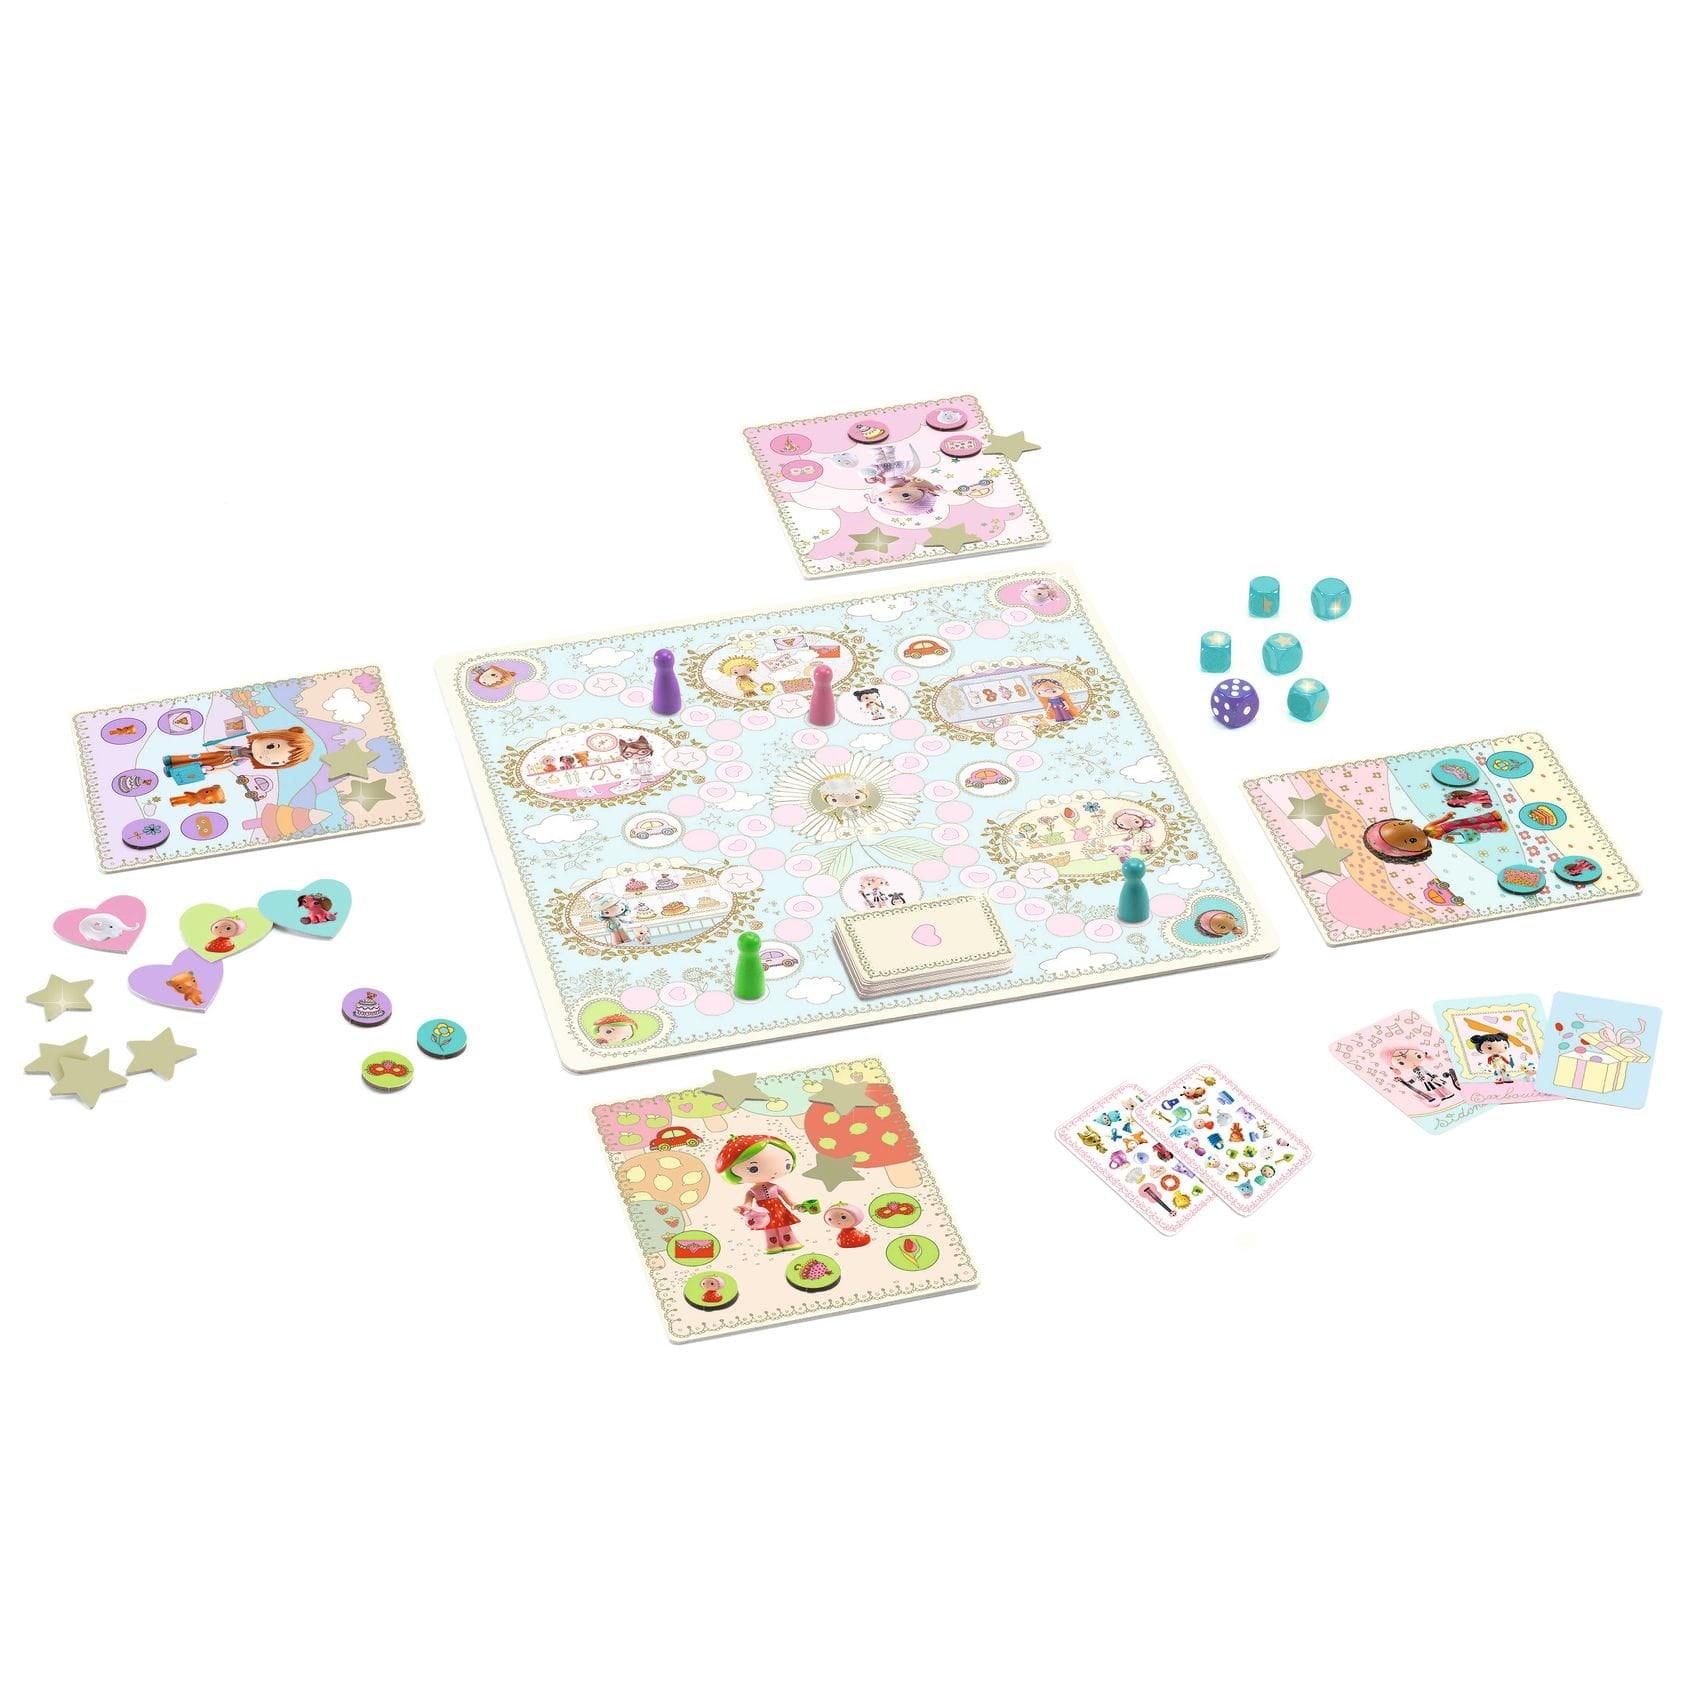 DJECO: Tinyly Party Board Game